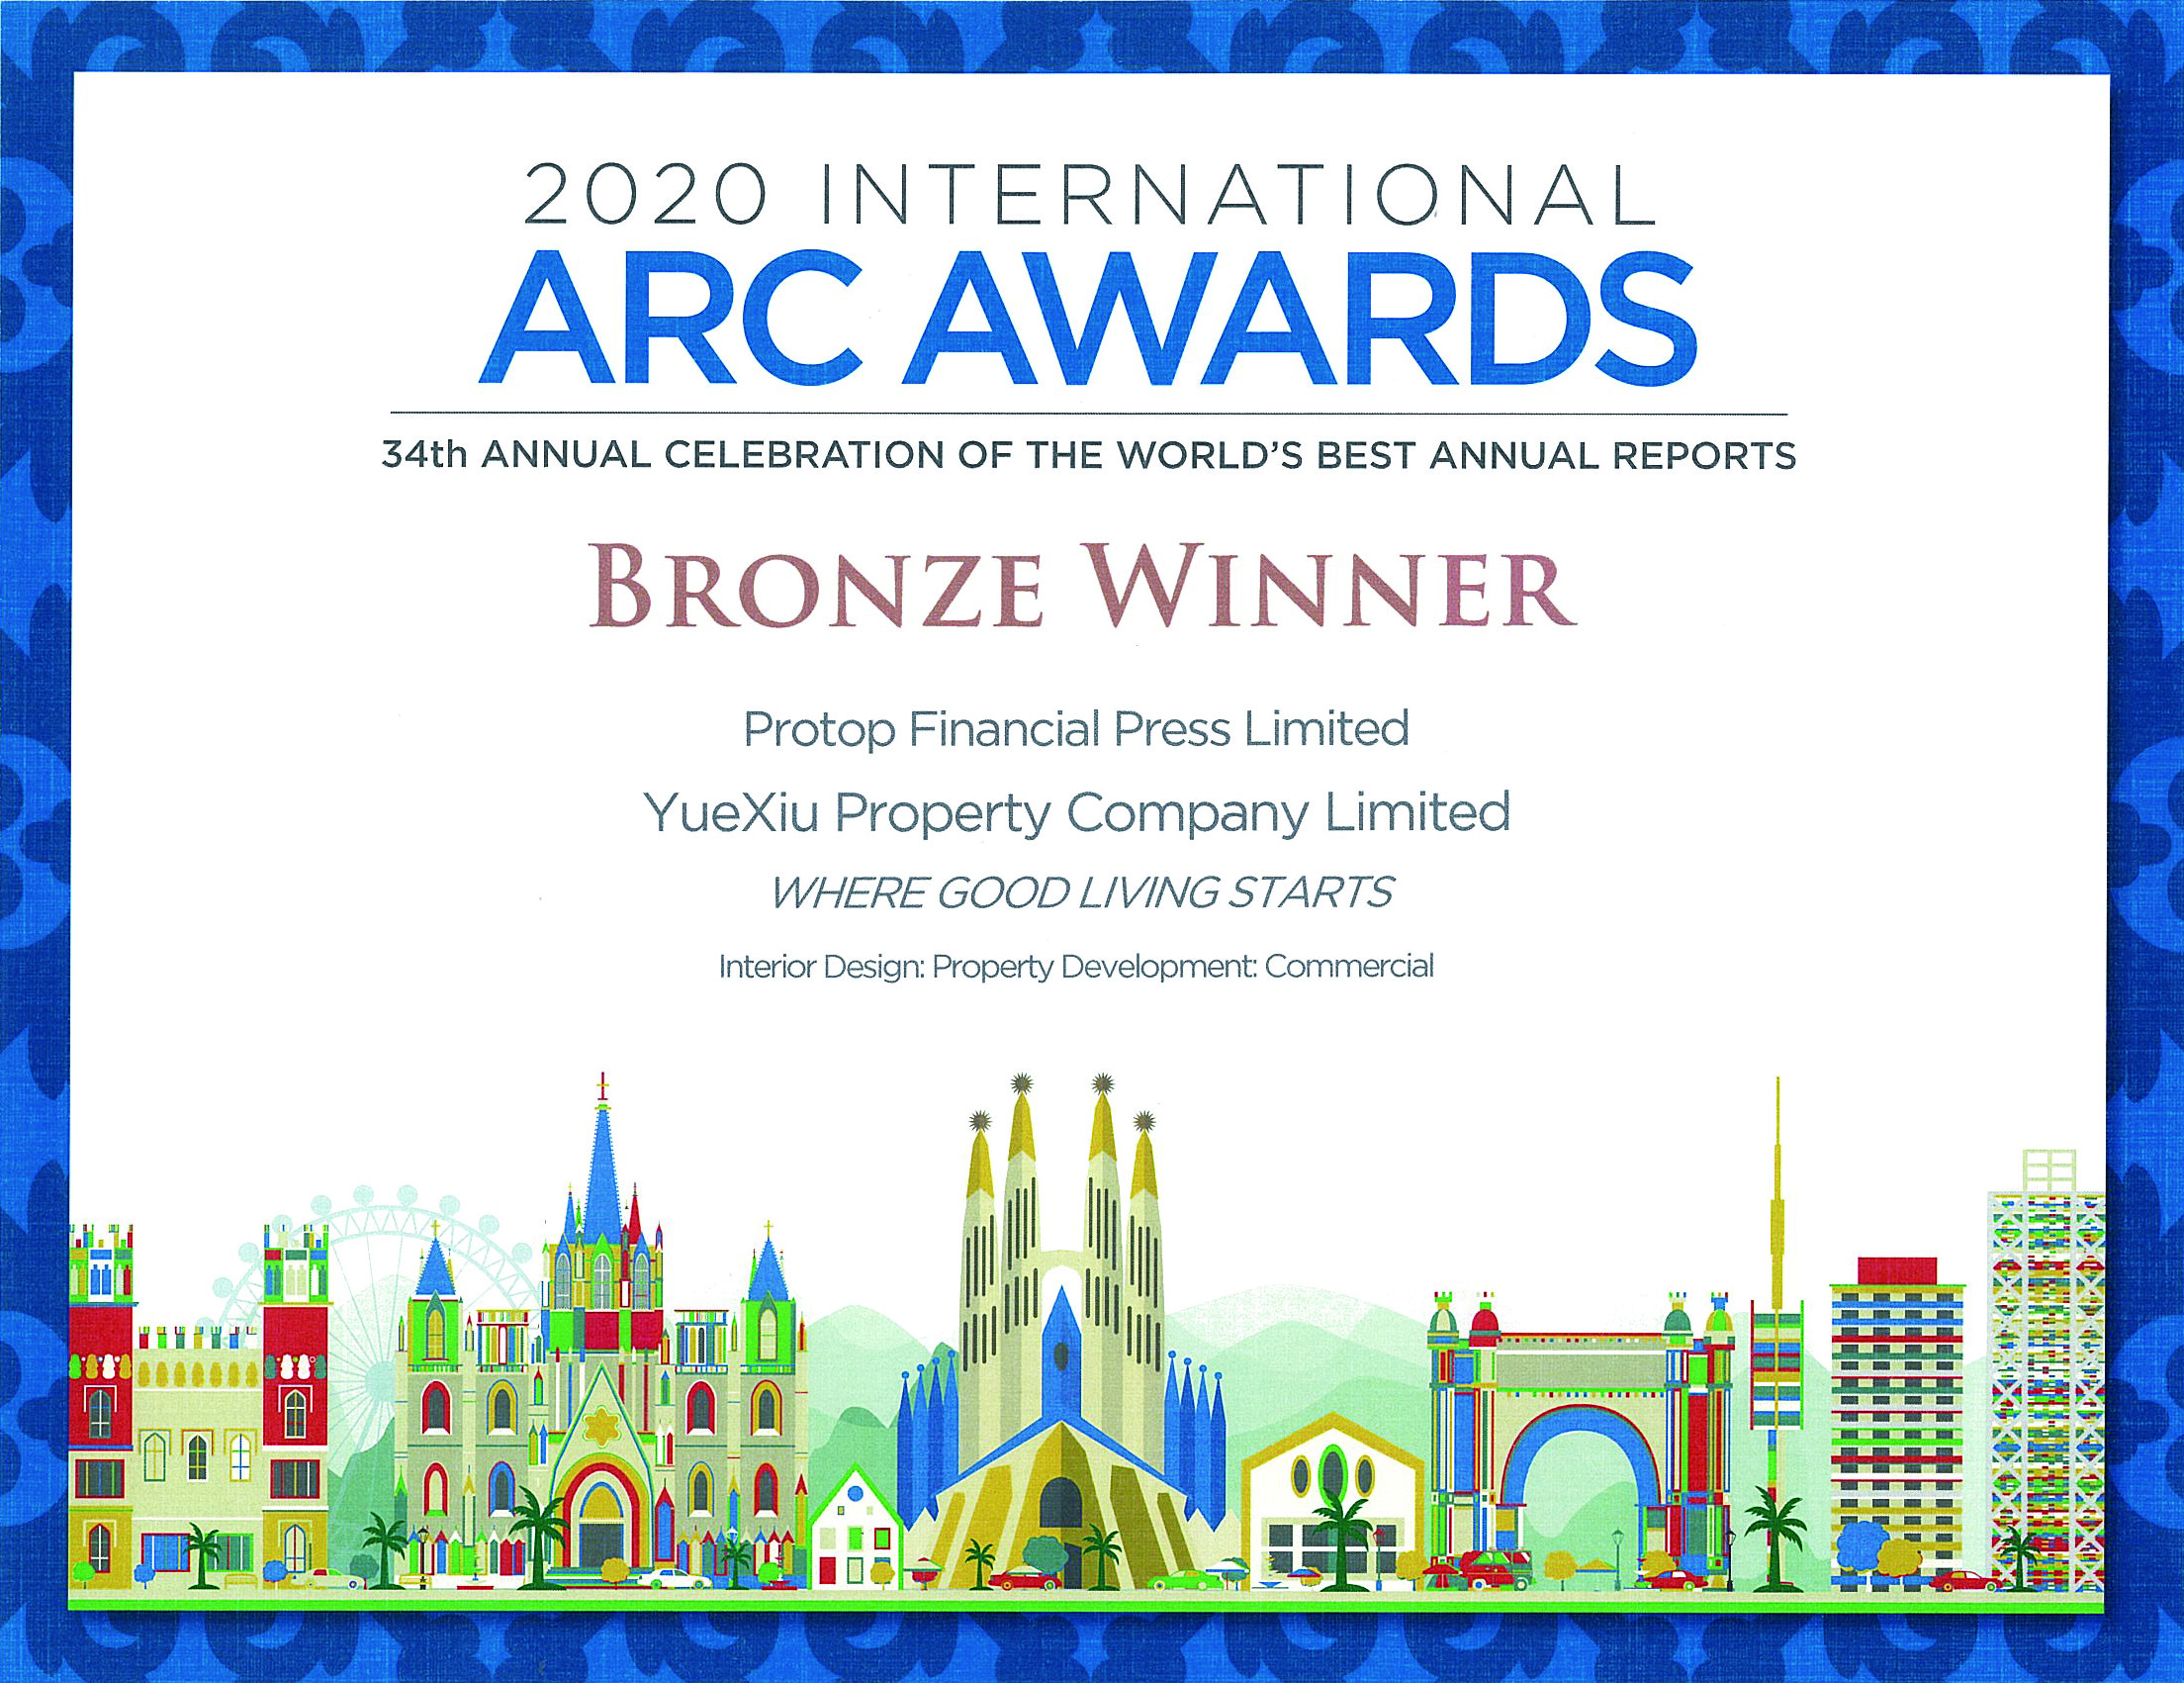 Yuexiu Property Company Limited 2020 Bronze Award Commercial